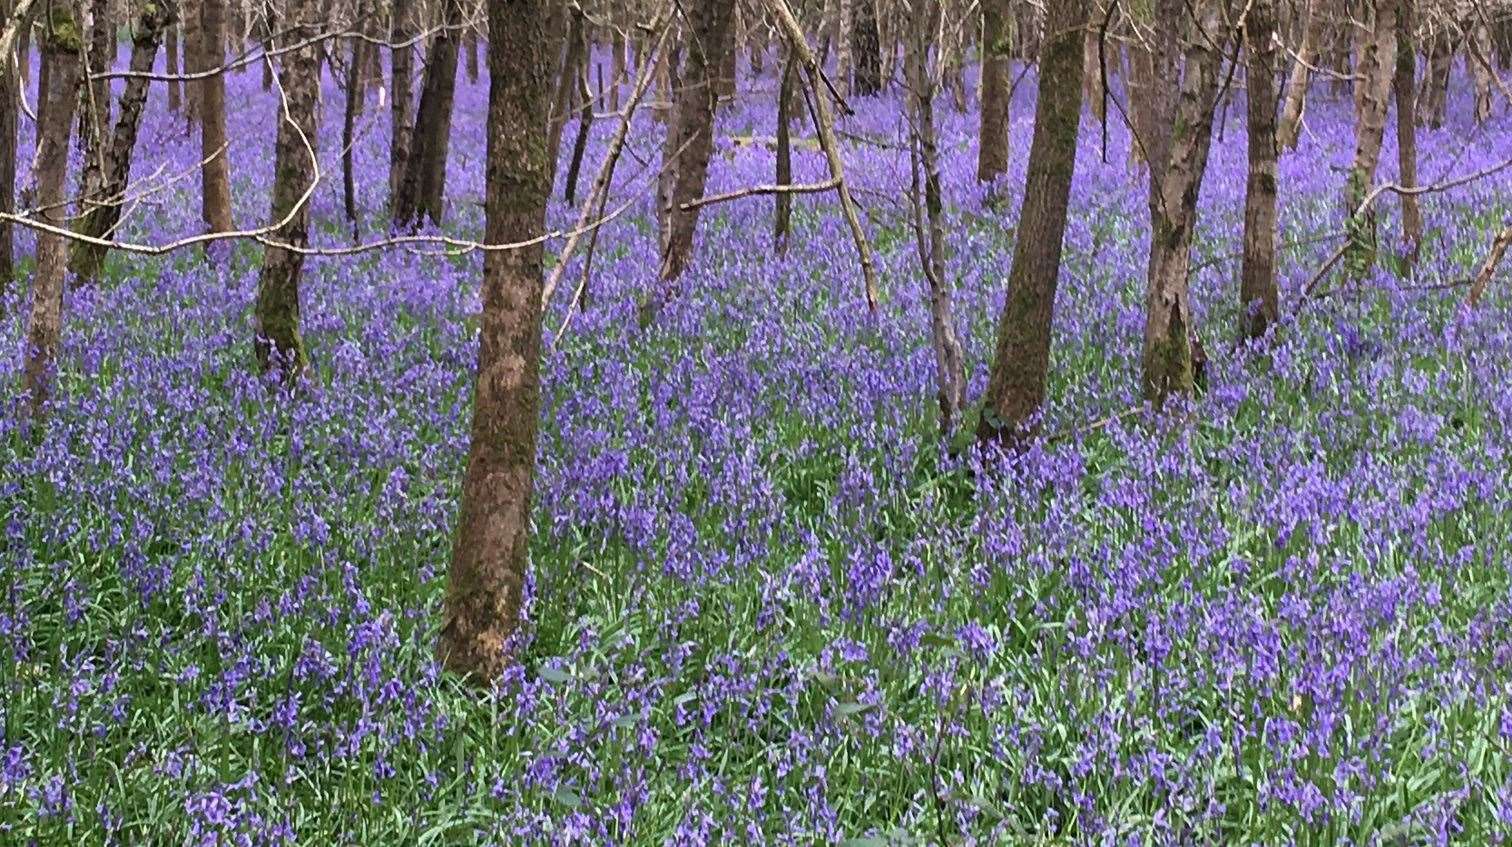 Bluebells are set to appear earlier than usual this year due to the warmer weather